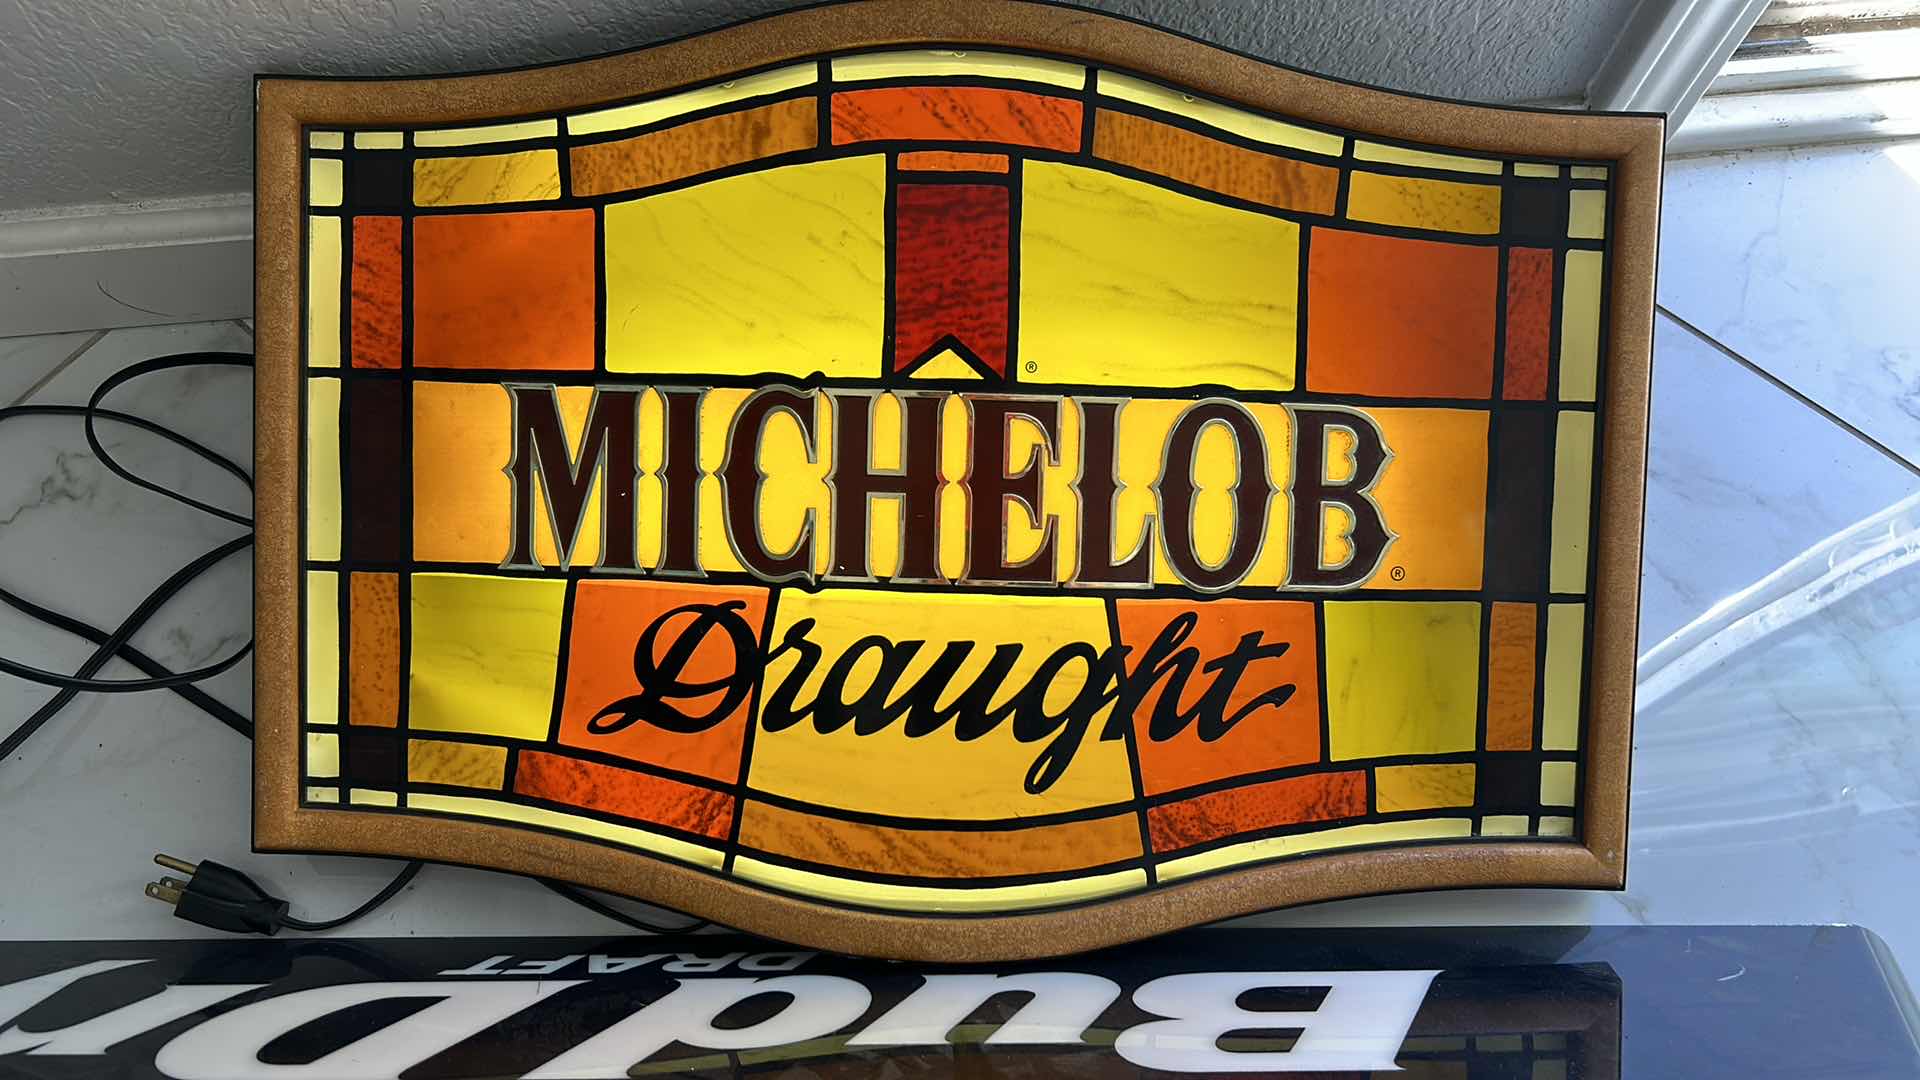 Photo 2 of MICHELOB BEER LIGHTED SIGN  24 1/2” x 16”